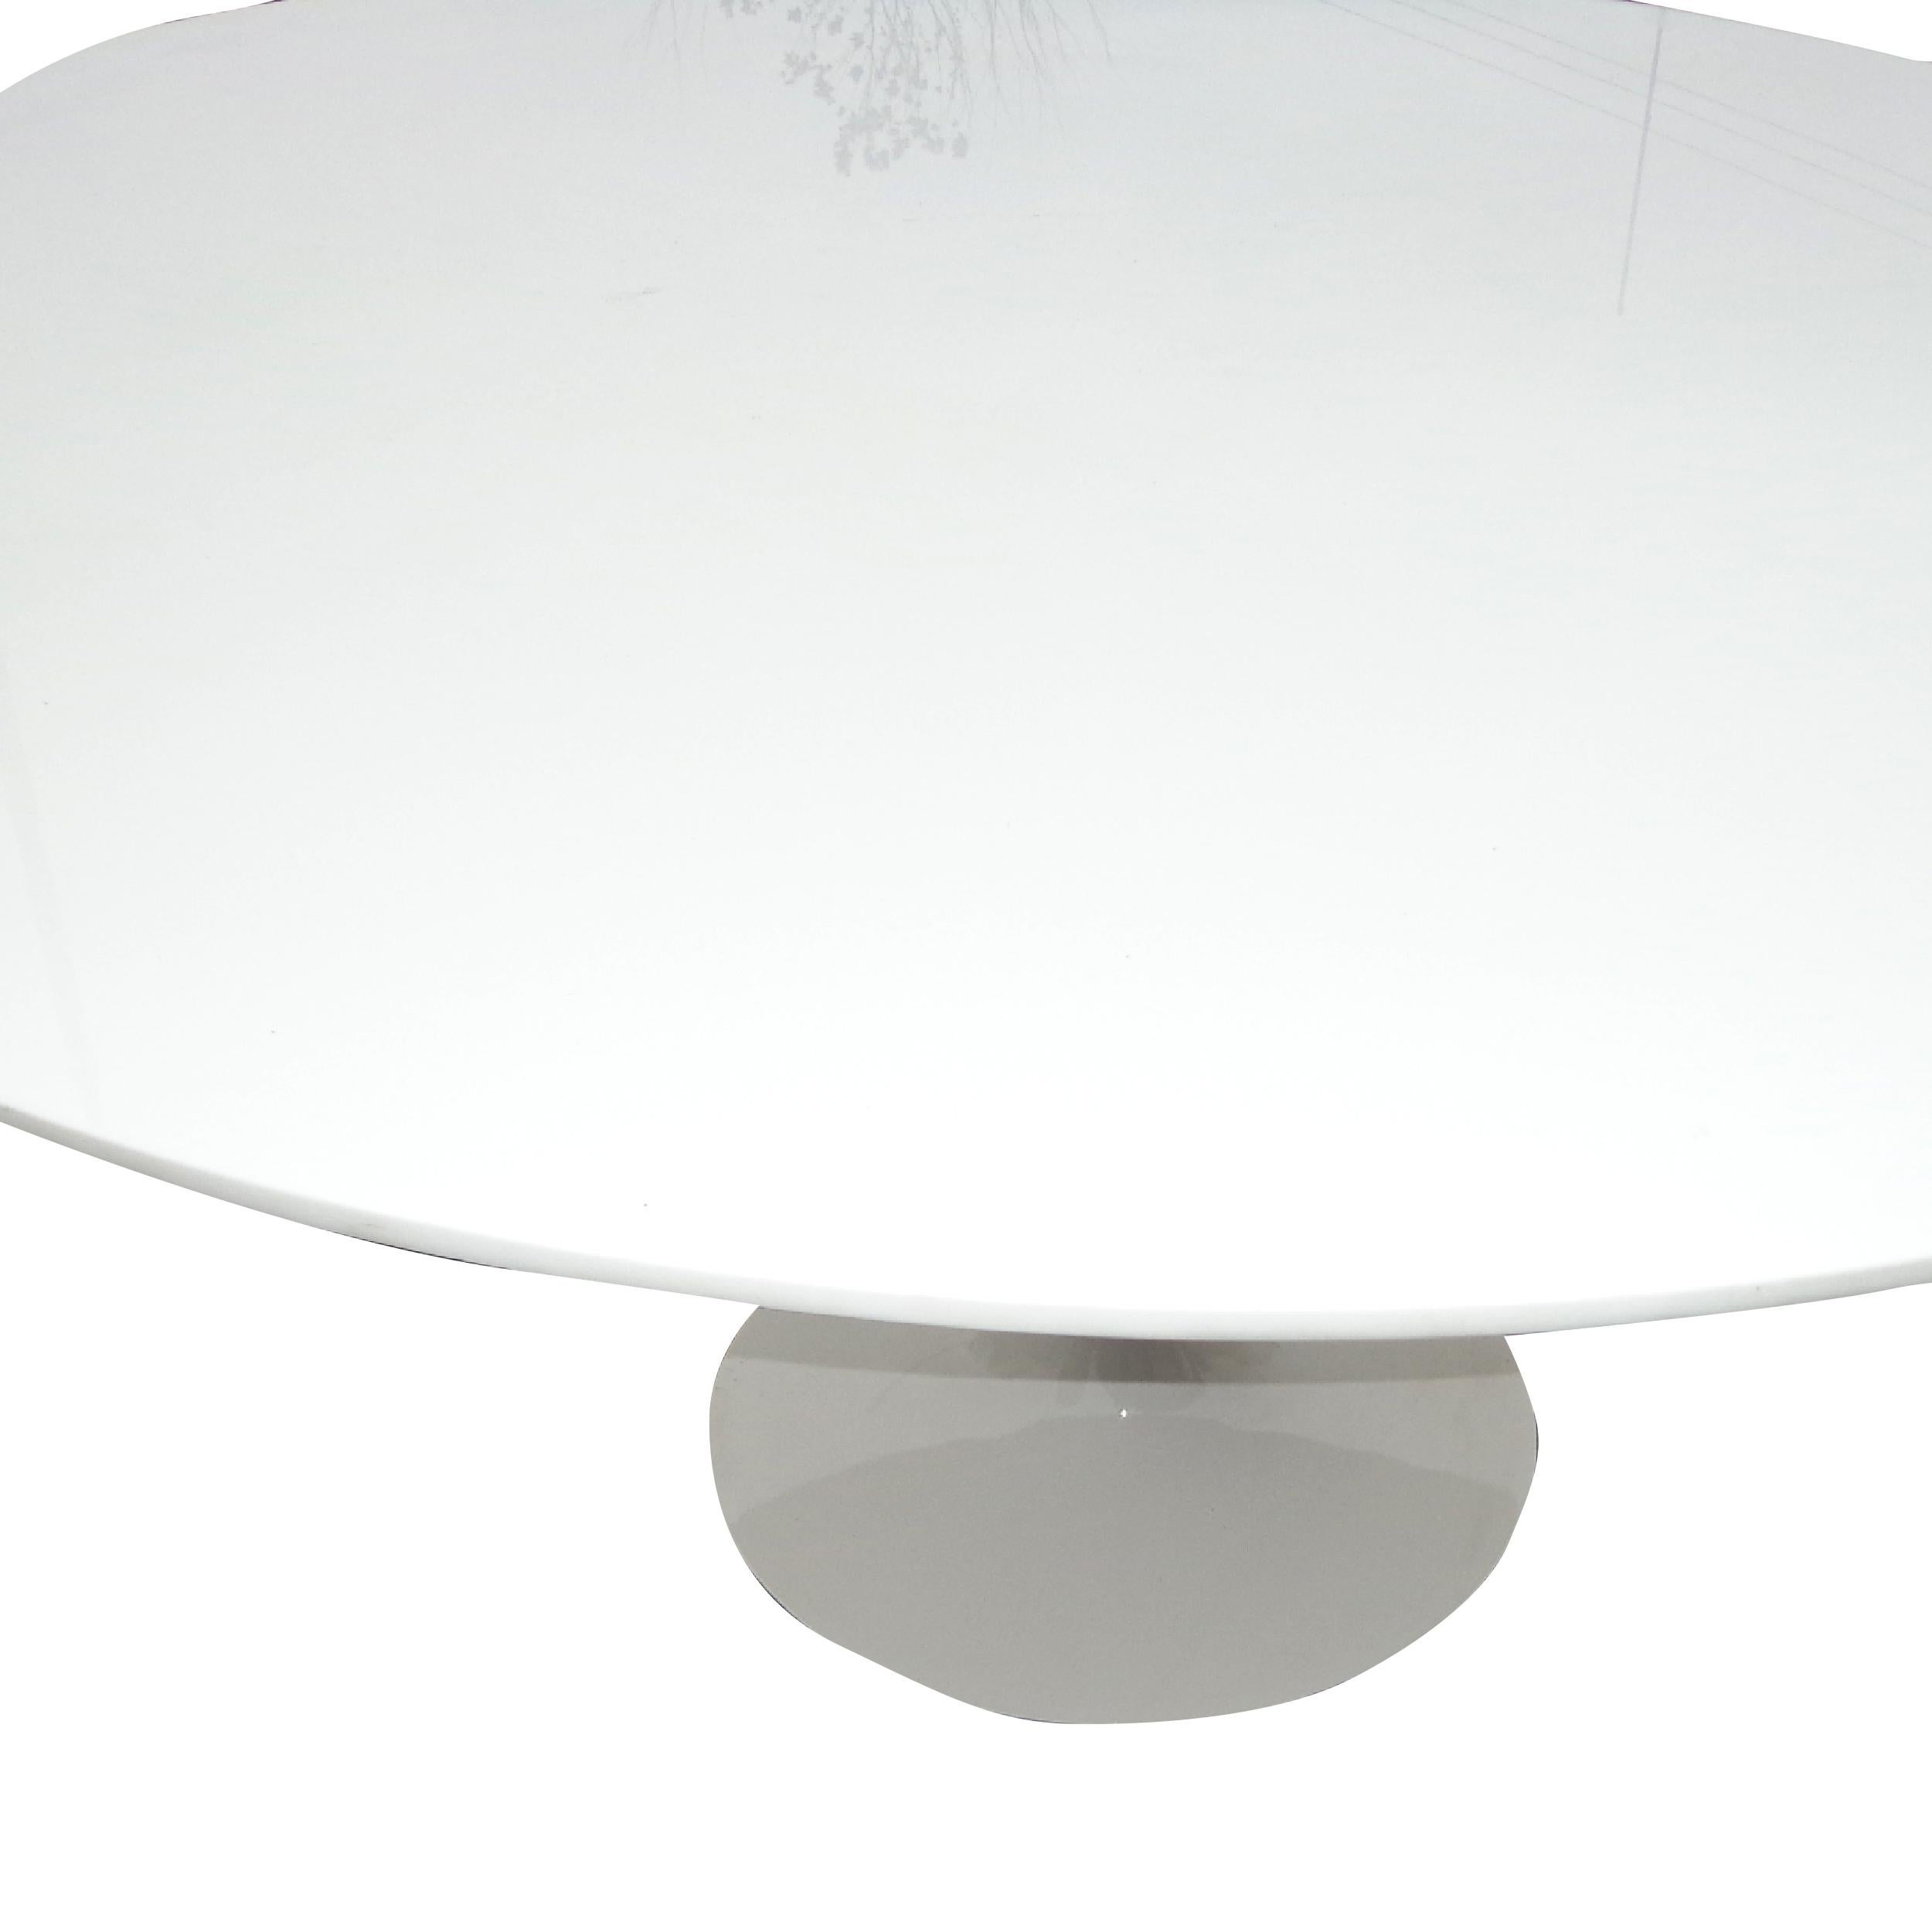 North American Knoll Saarinen Table with Custom Ice White Ceramic Top For Sale